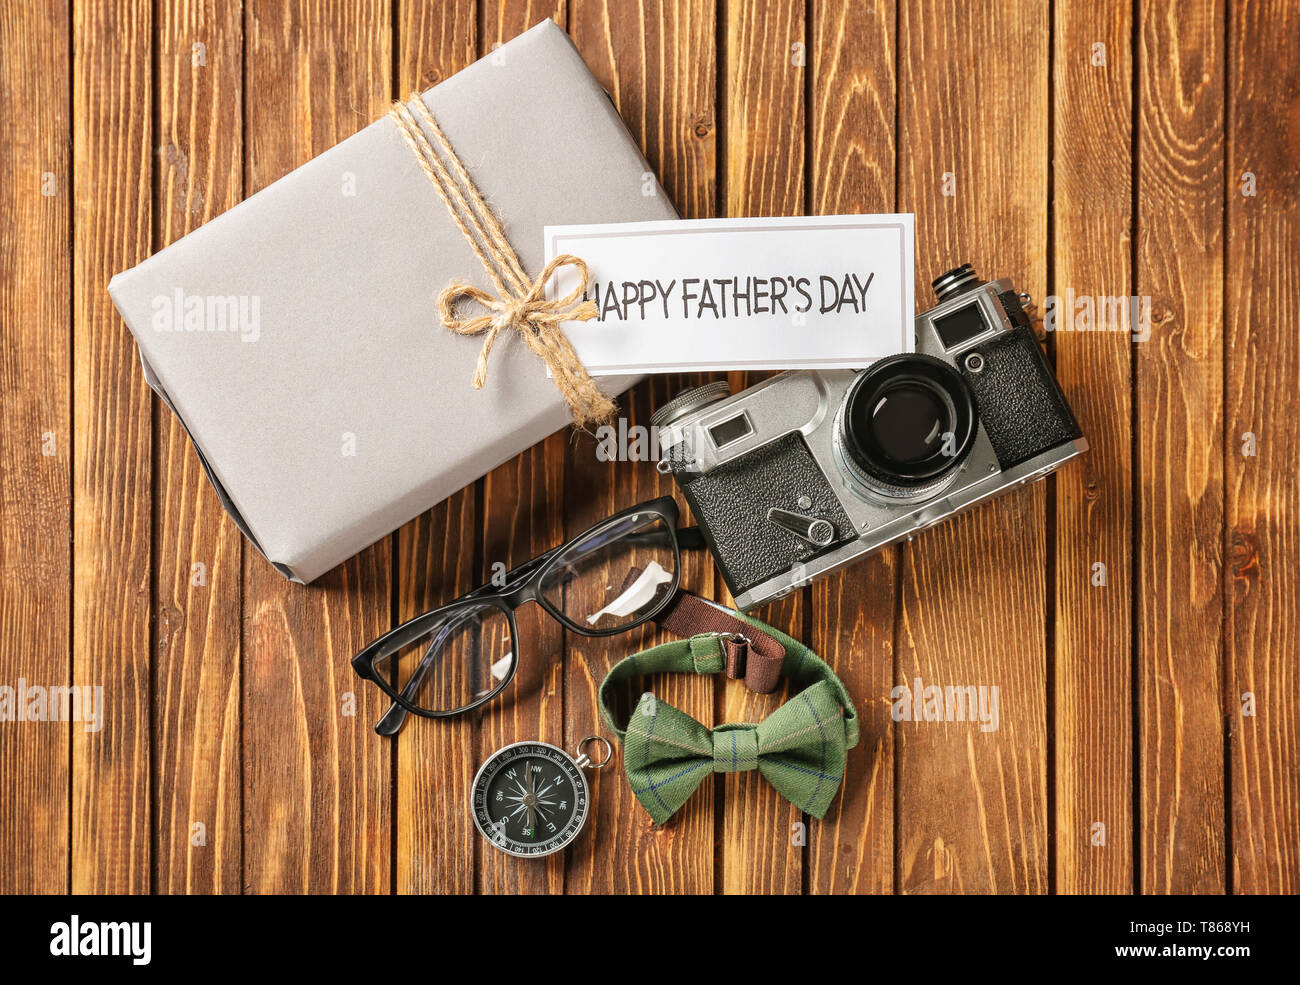 Gift box, photo camera and male accessories on wooden background. Happy Father's Day celebration Stock Photo